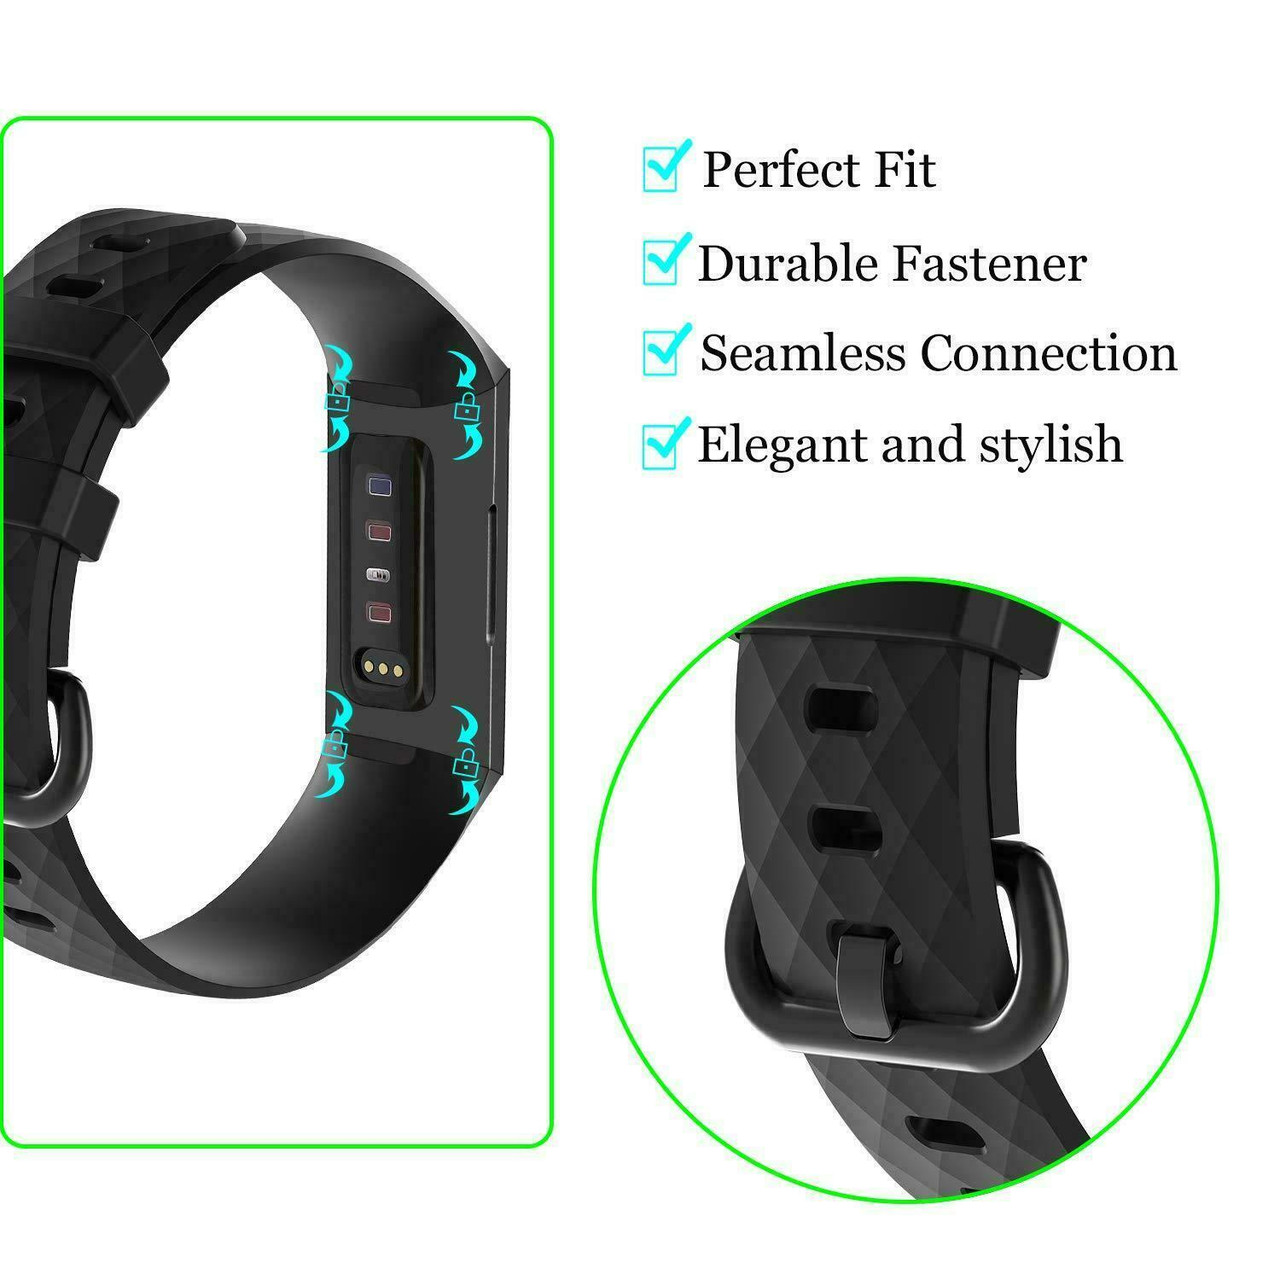 For OEM Fitbit Charge 3 Replacement Wrist Band Silicone Bracelet Watch Rate Fit